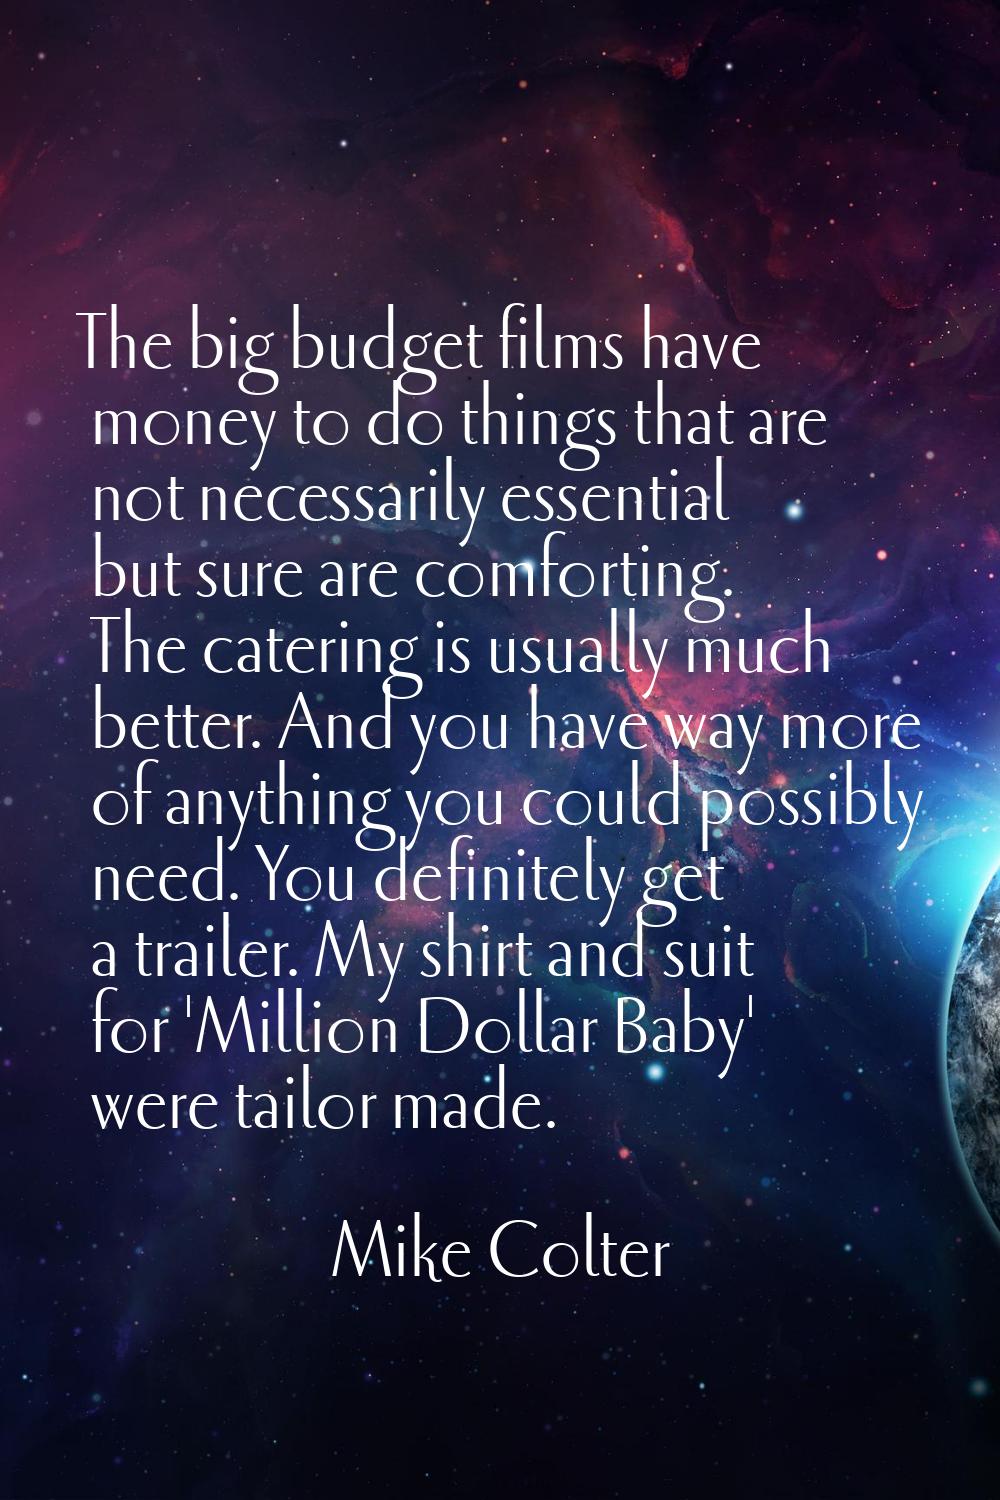 The big budget films have money to do things that are not necessarily essential but sure are comfor